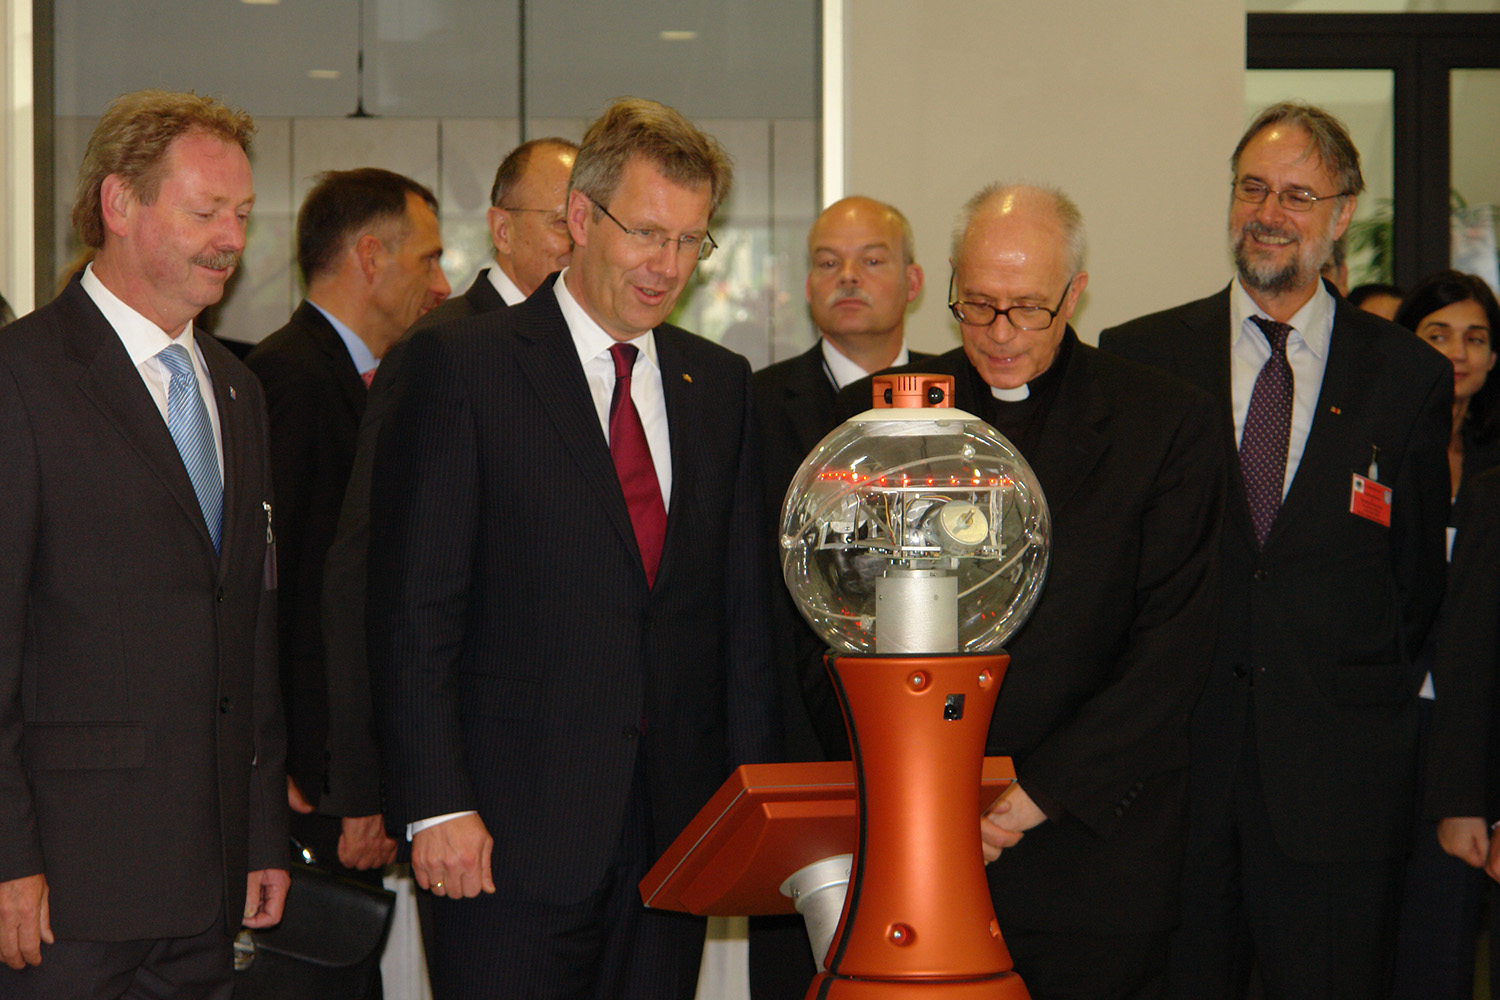 Federal President Wulff and other guests are welcomed to the IDMT by a robot.